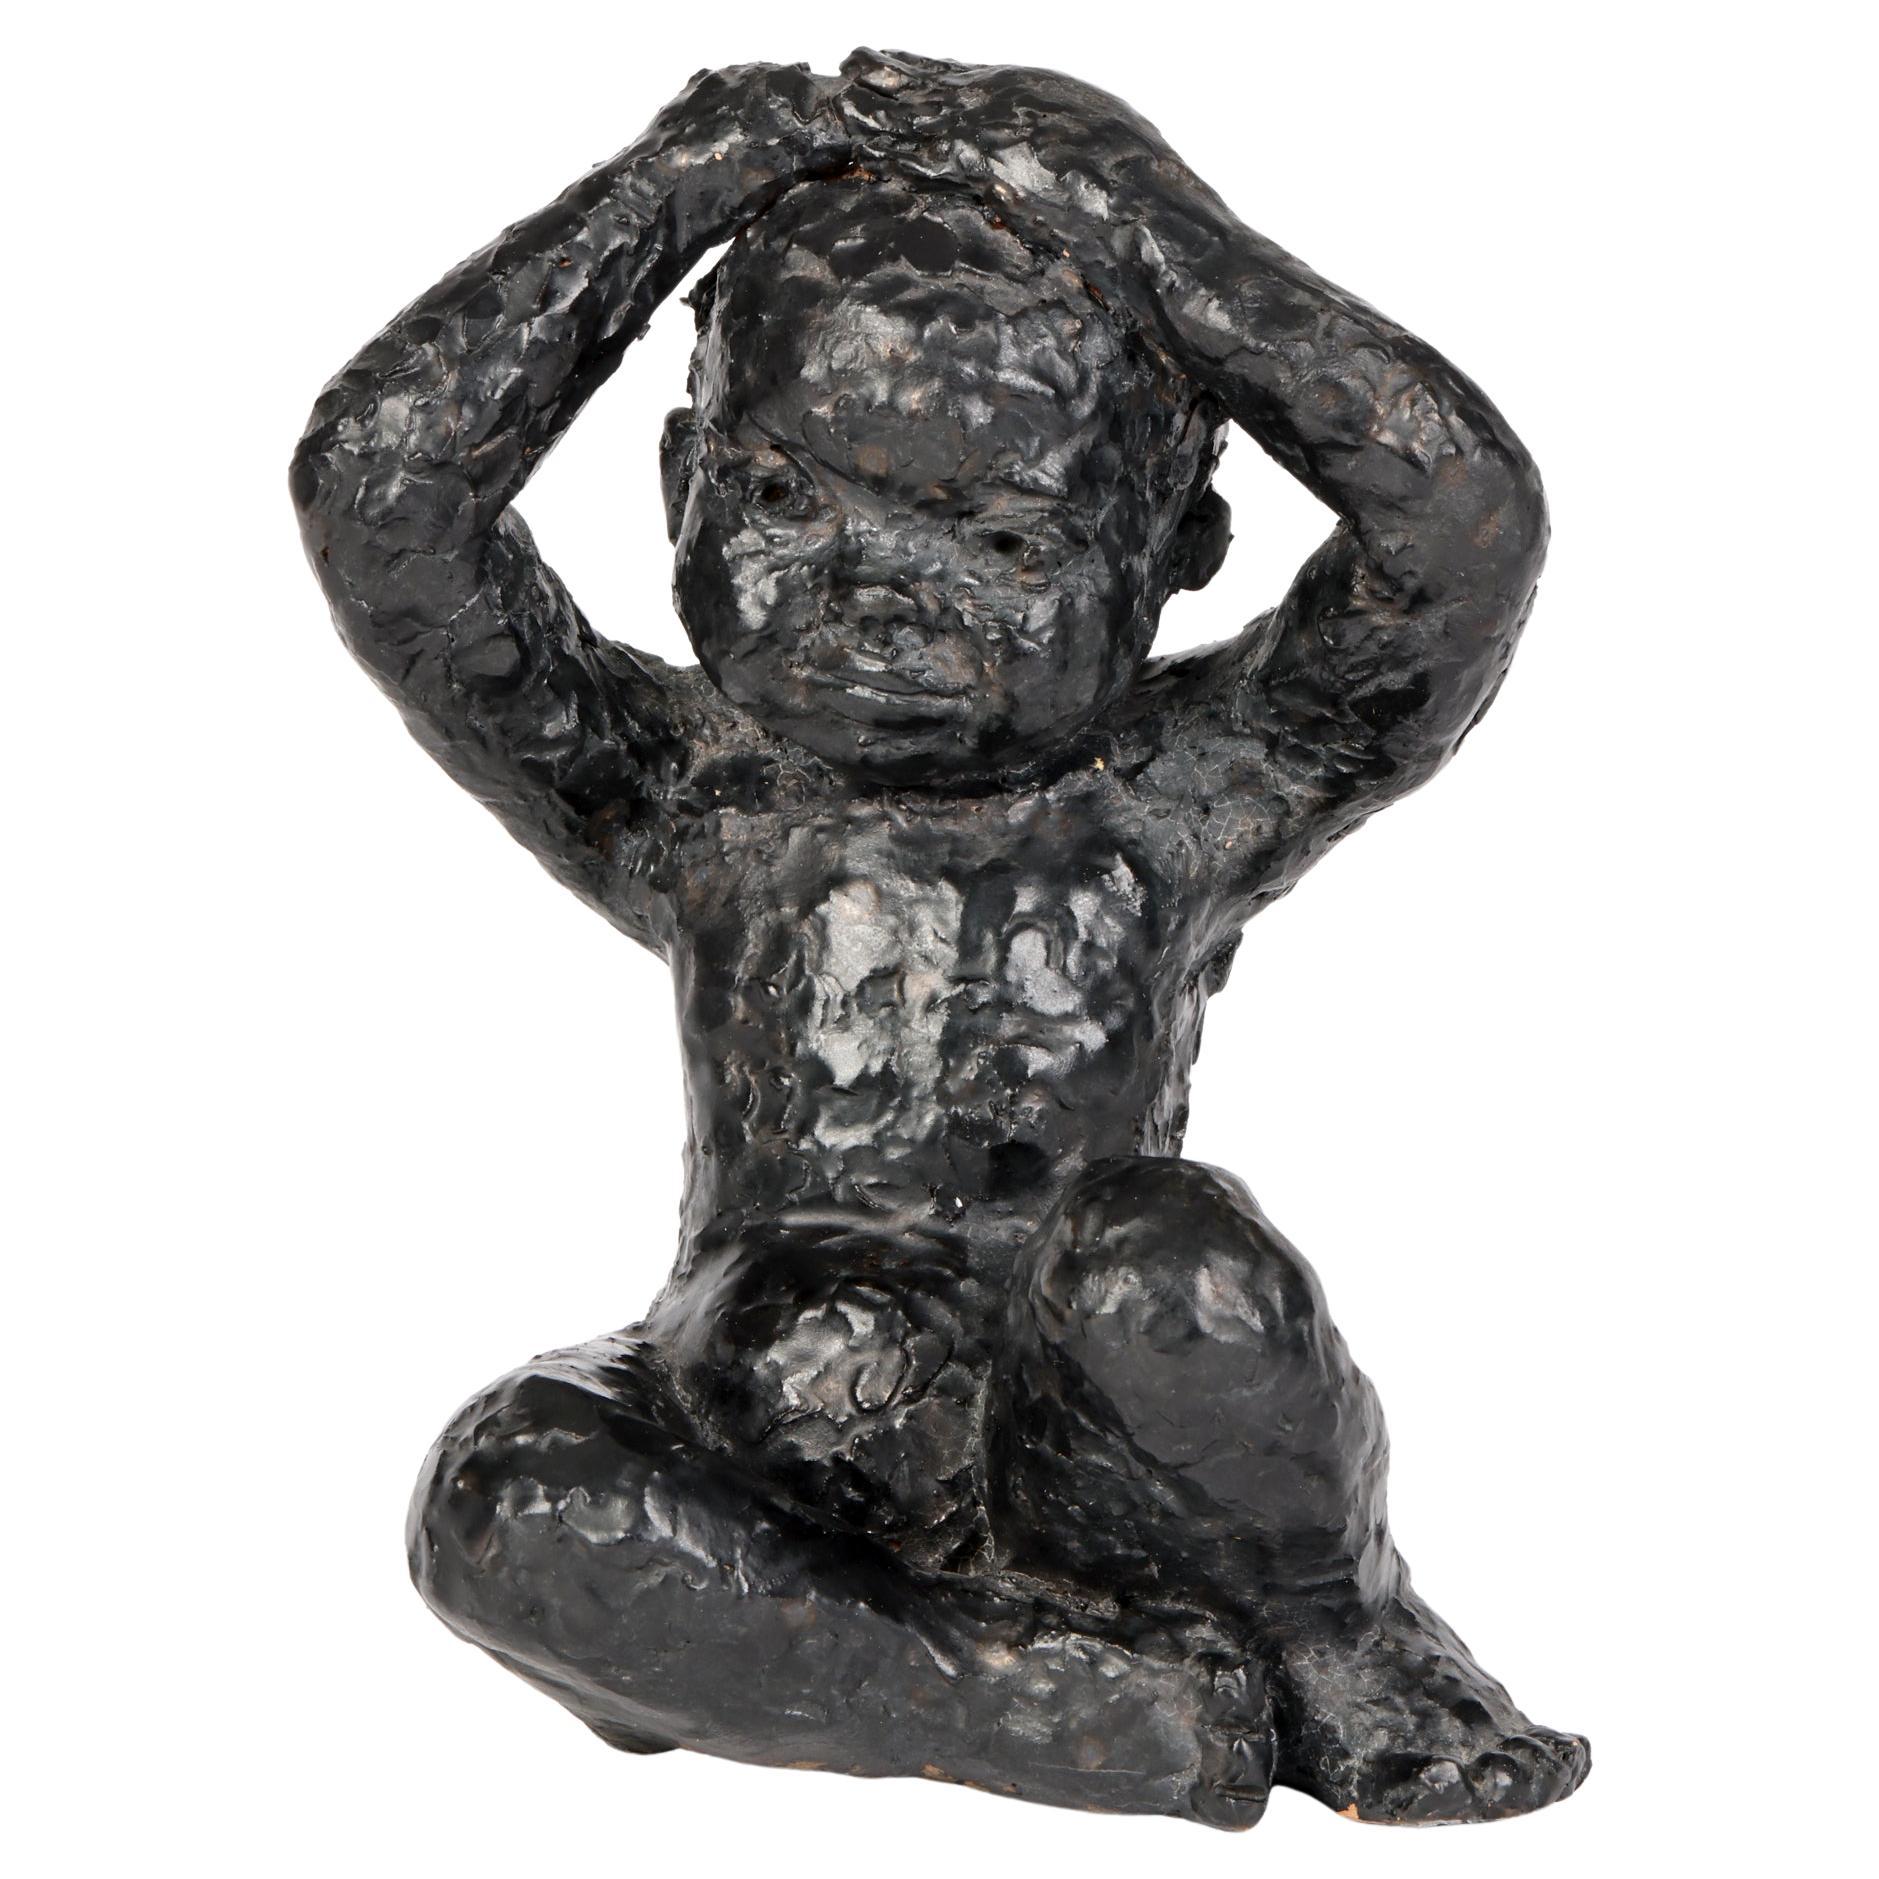 George West Studio Pottery Black Glazed Seated Child Sculpture Dated 1969